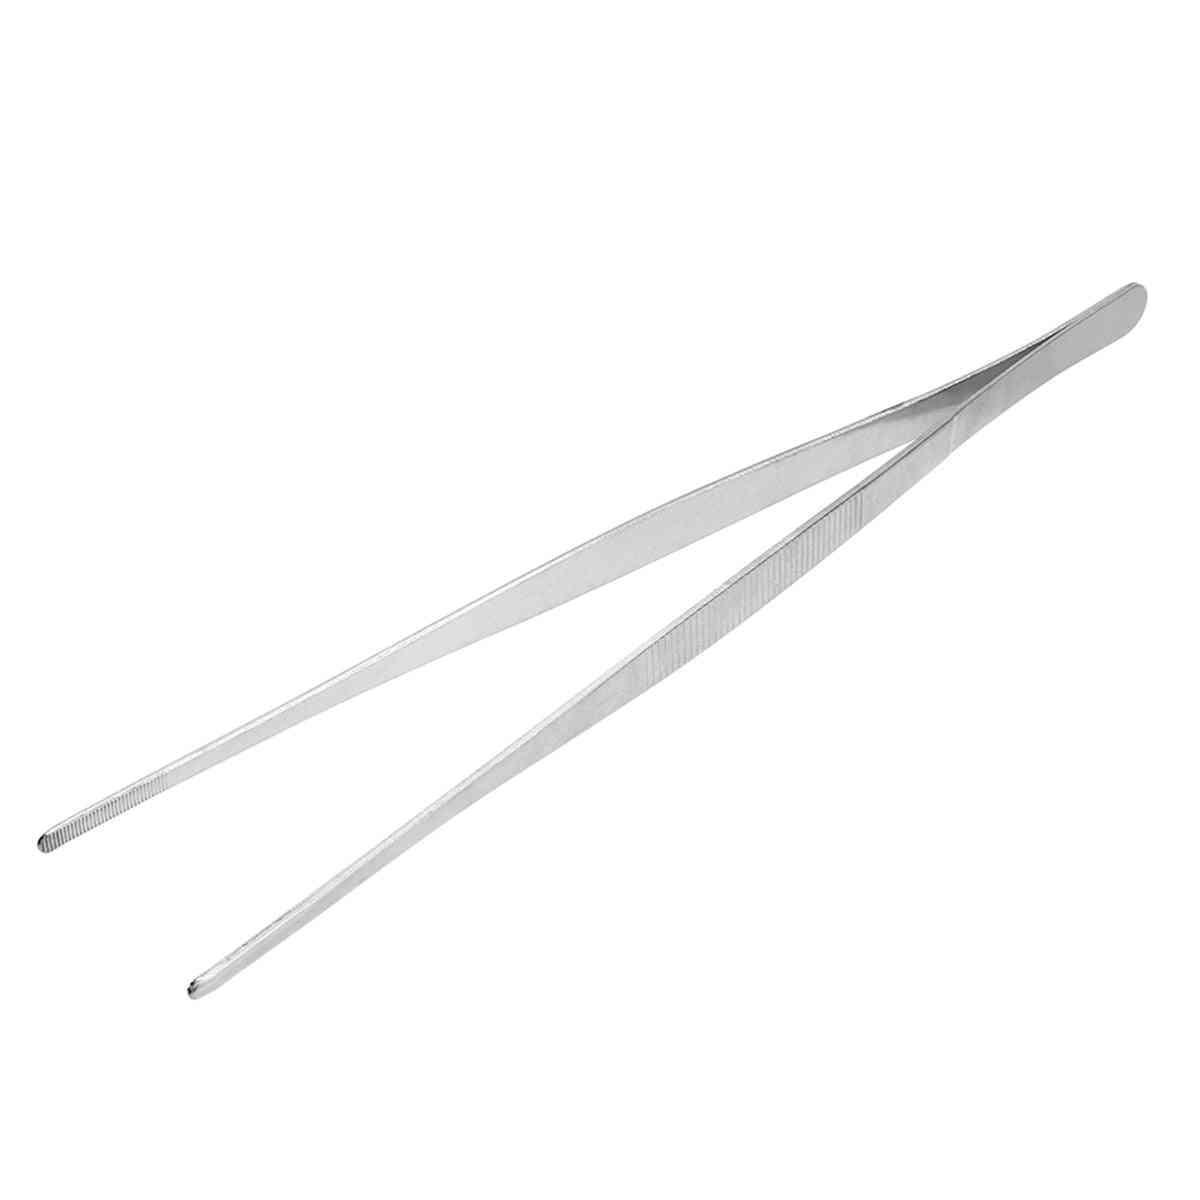 Barbecue Clip For Kitchen Outdoor Bbq, Straight Tweezers